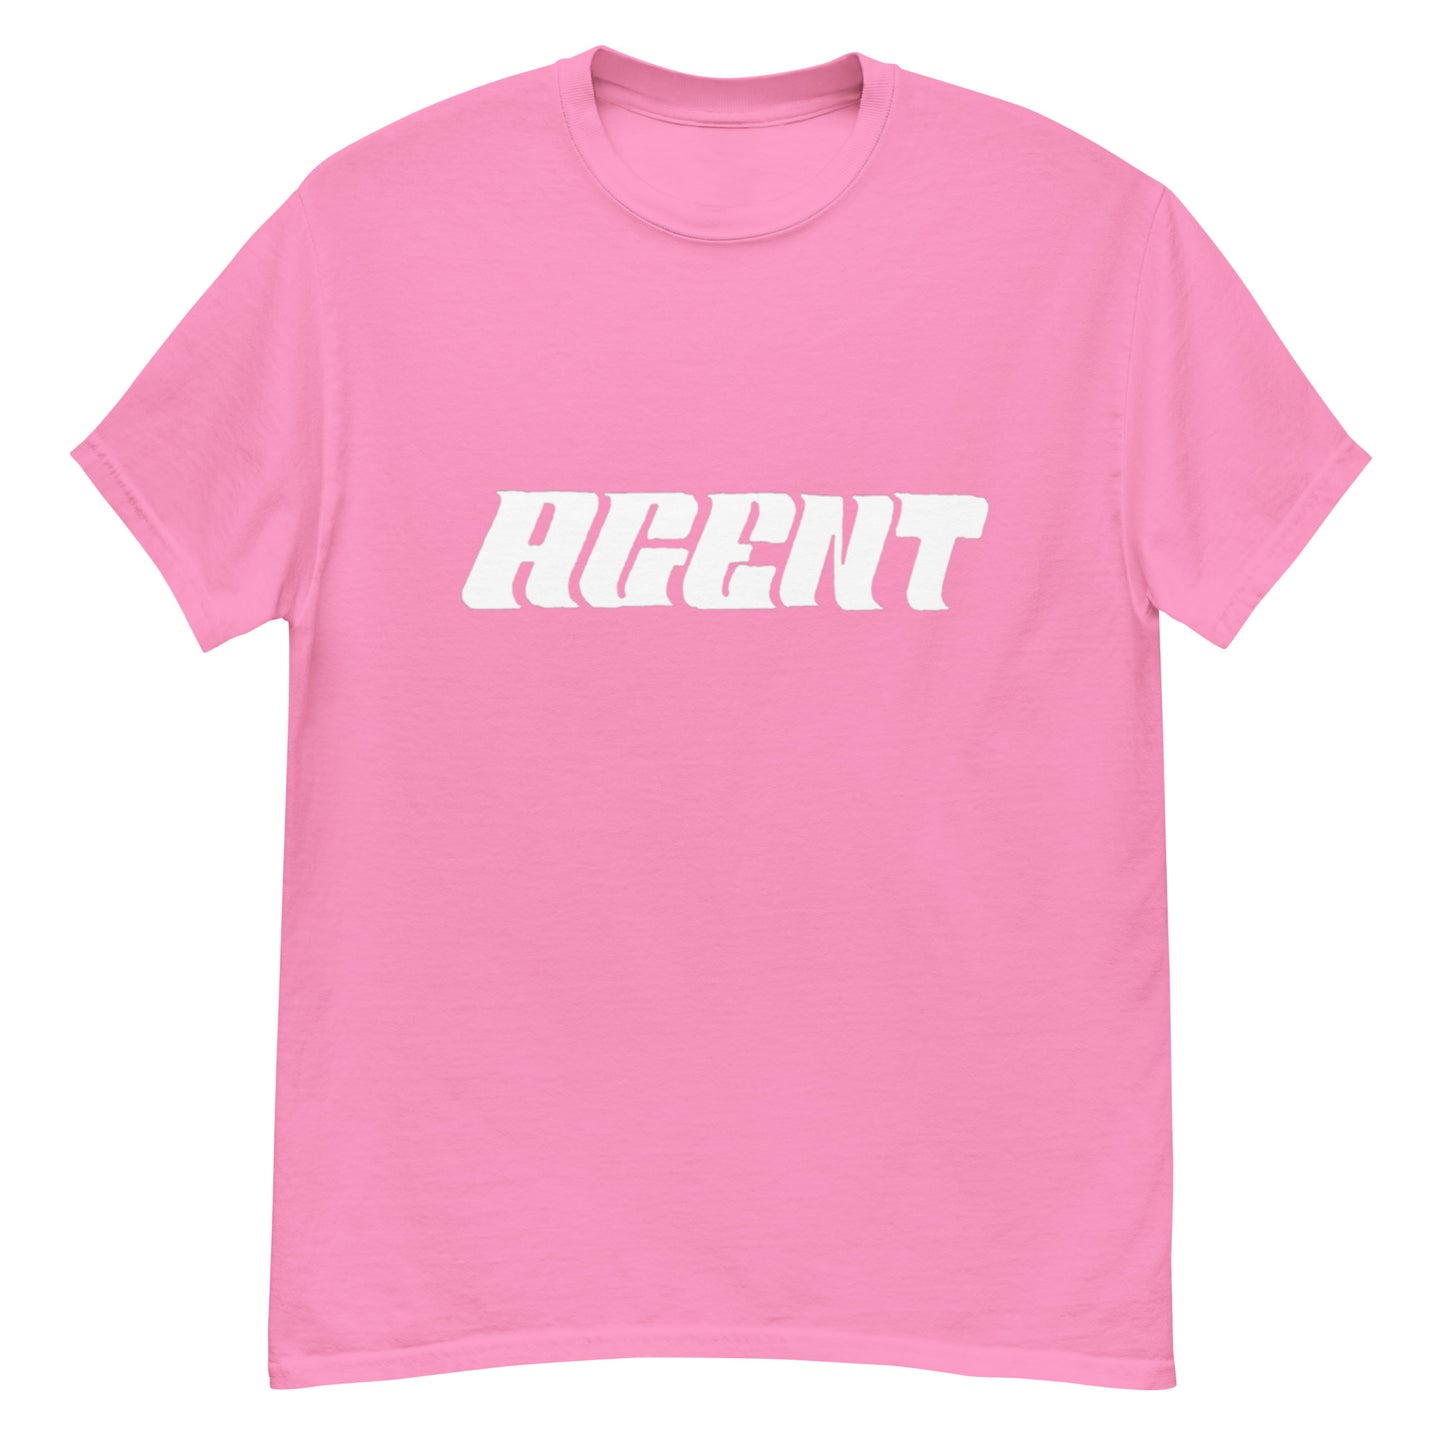 Agent White Letters T-Shirt -Basic Tee